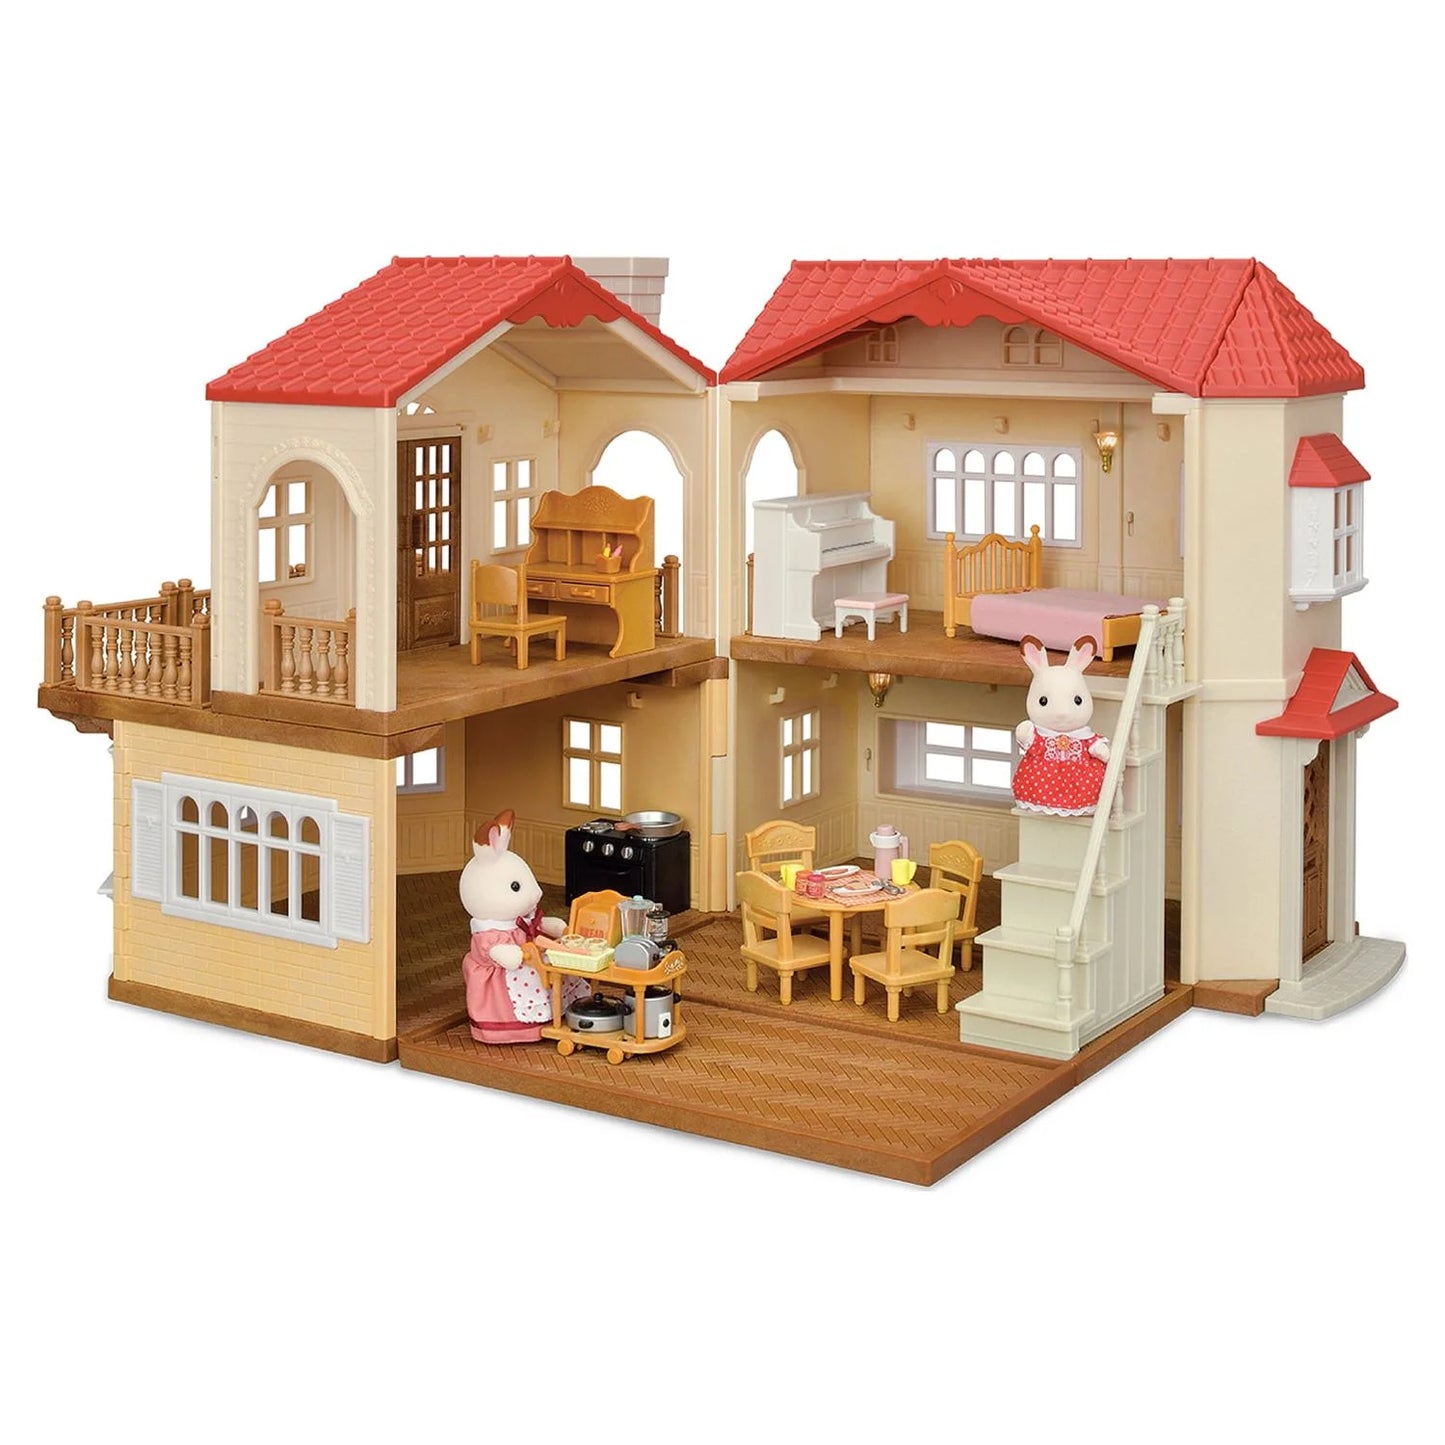 RED ROOF COUNTRY HOME GIFT SET